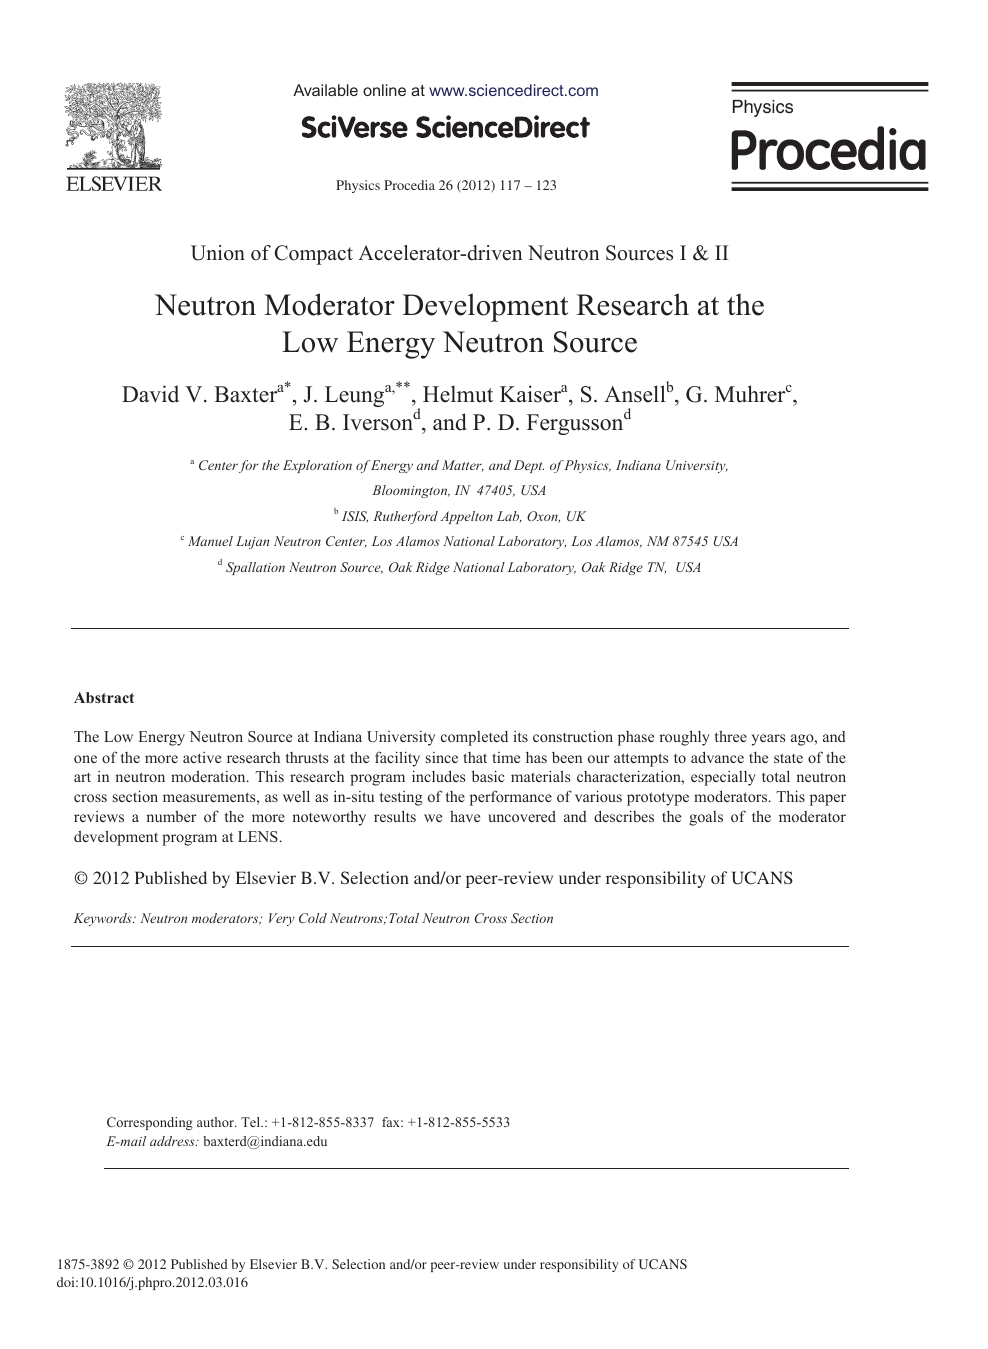 Neutron Moderator Development Research At The Low Energy Neutron Source Topic Of Research Paper In Physical Sciences Download Scholarly Article Pdf And Read For Free On Cyberleninka Open Science Hub